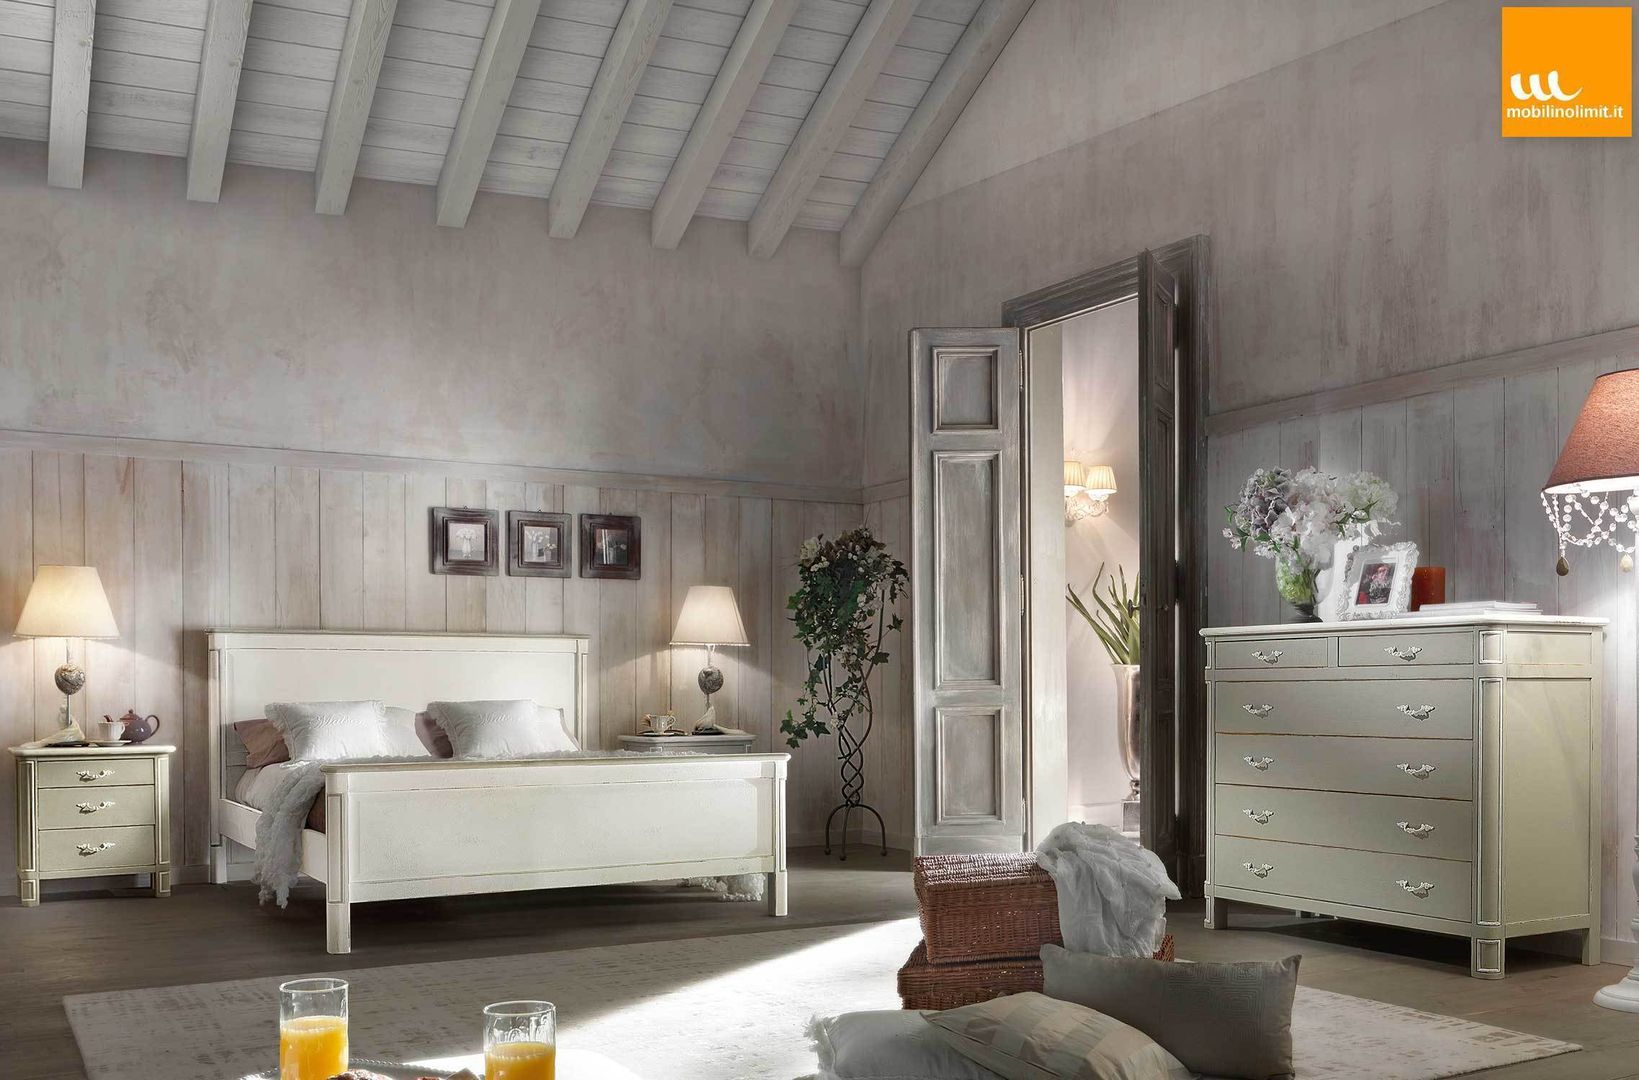 Mobili in stile Shabby Chic, Mobilinolimit Mobilinolimit Rustic style bedroom Beds & headboards